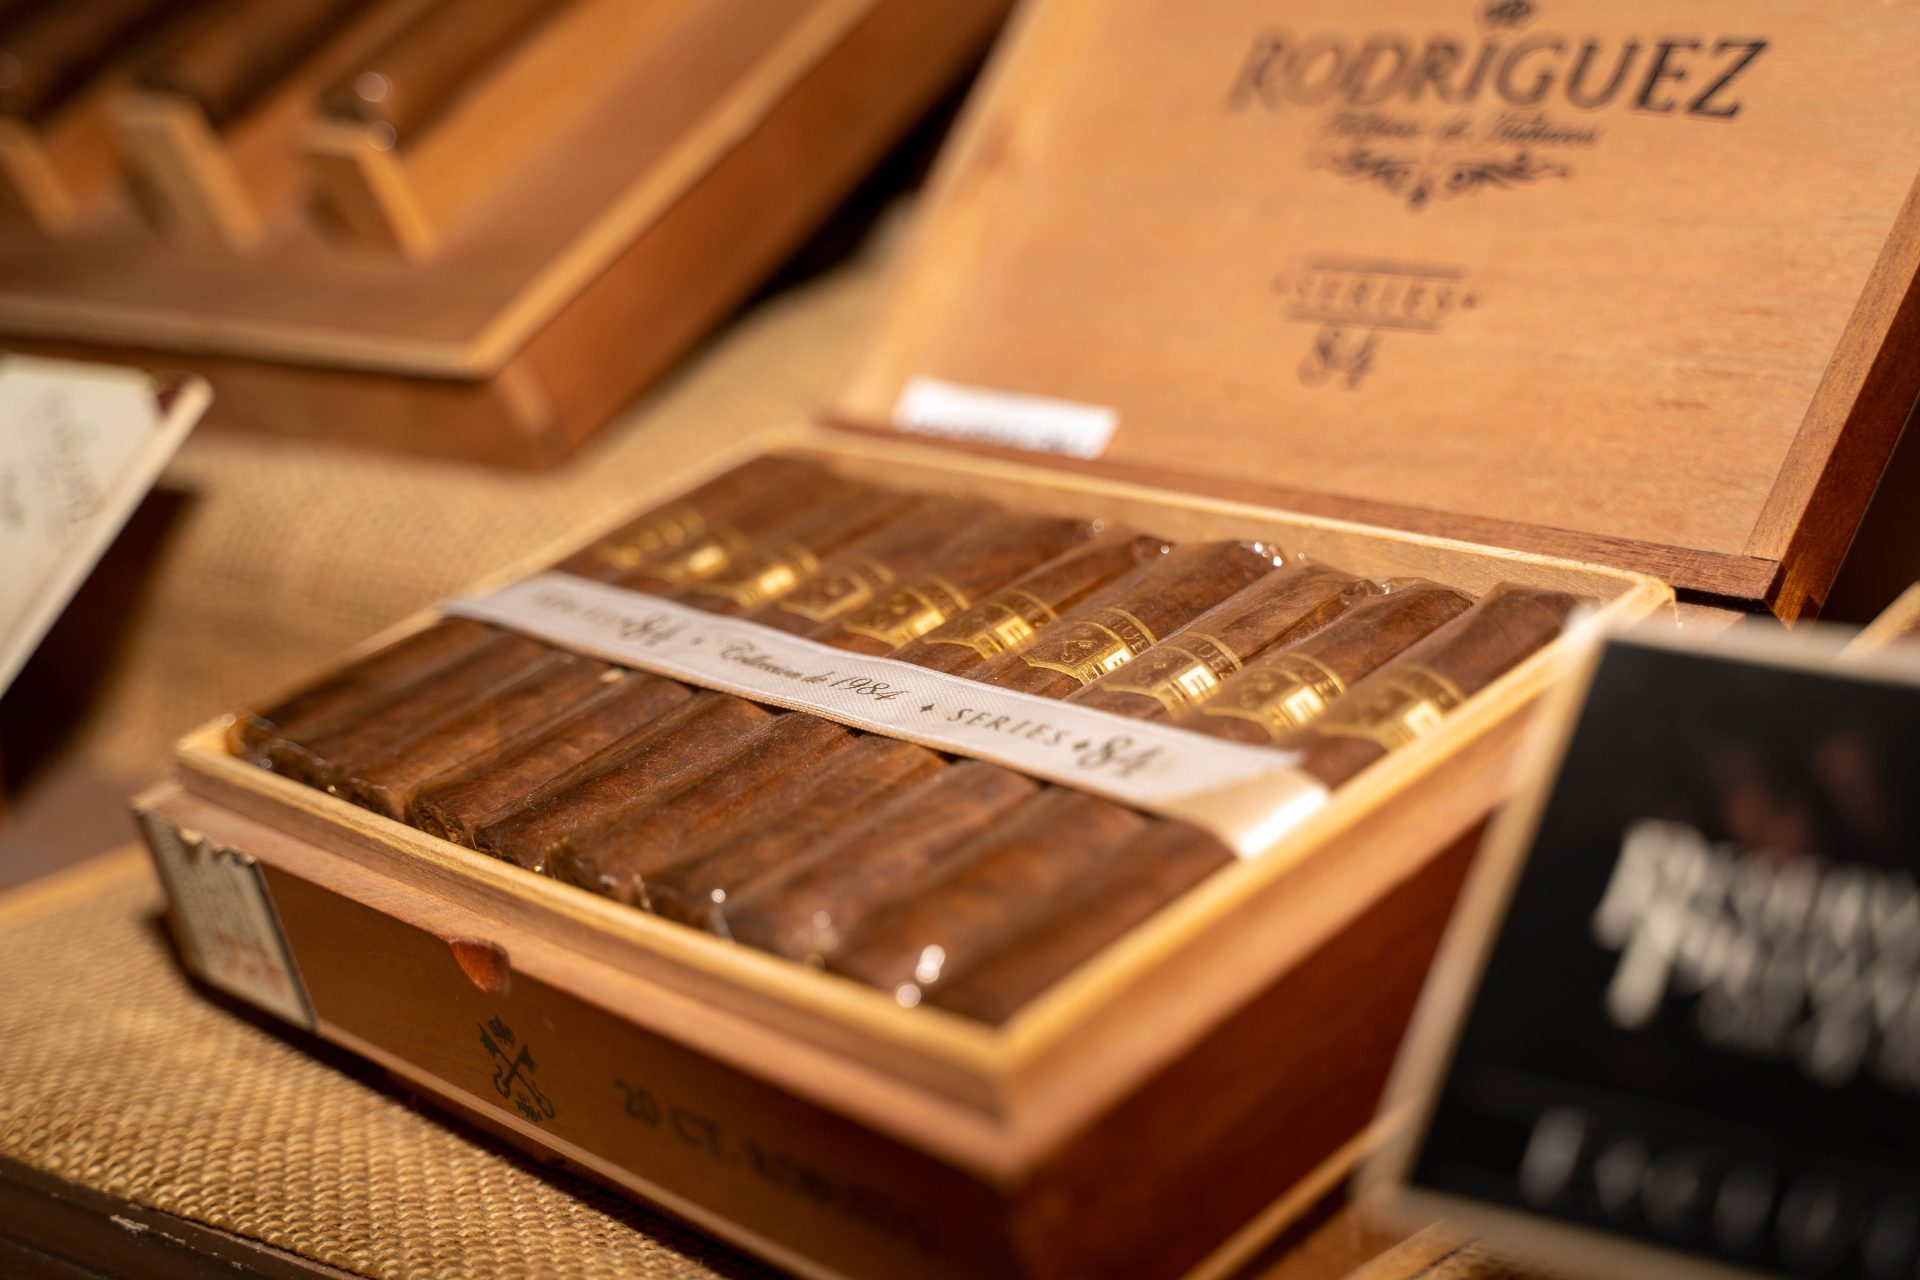 My Visit To Rodriguez Cigars